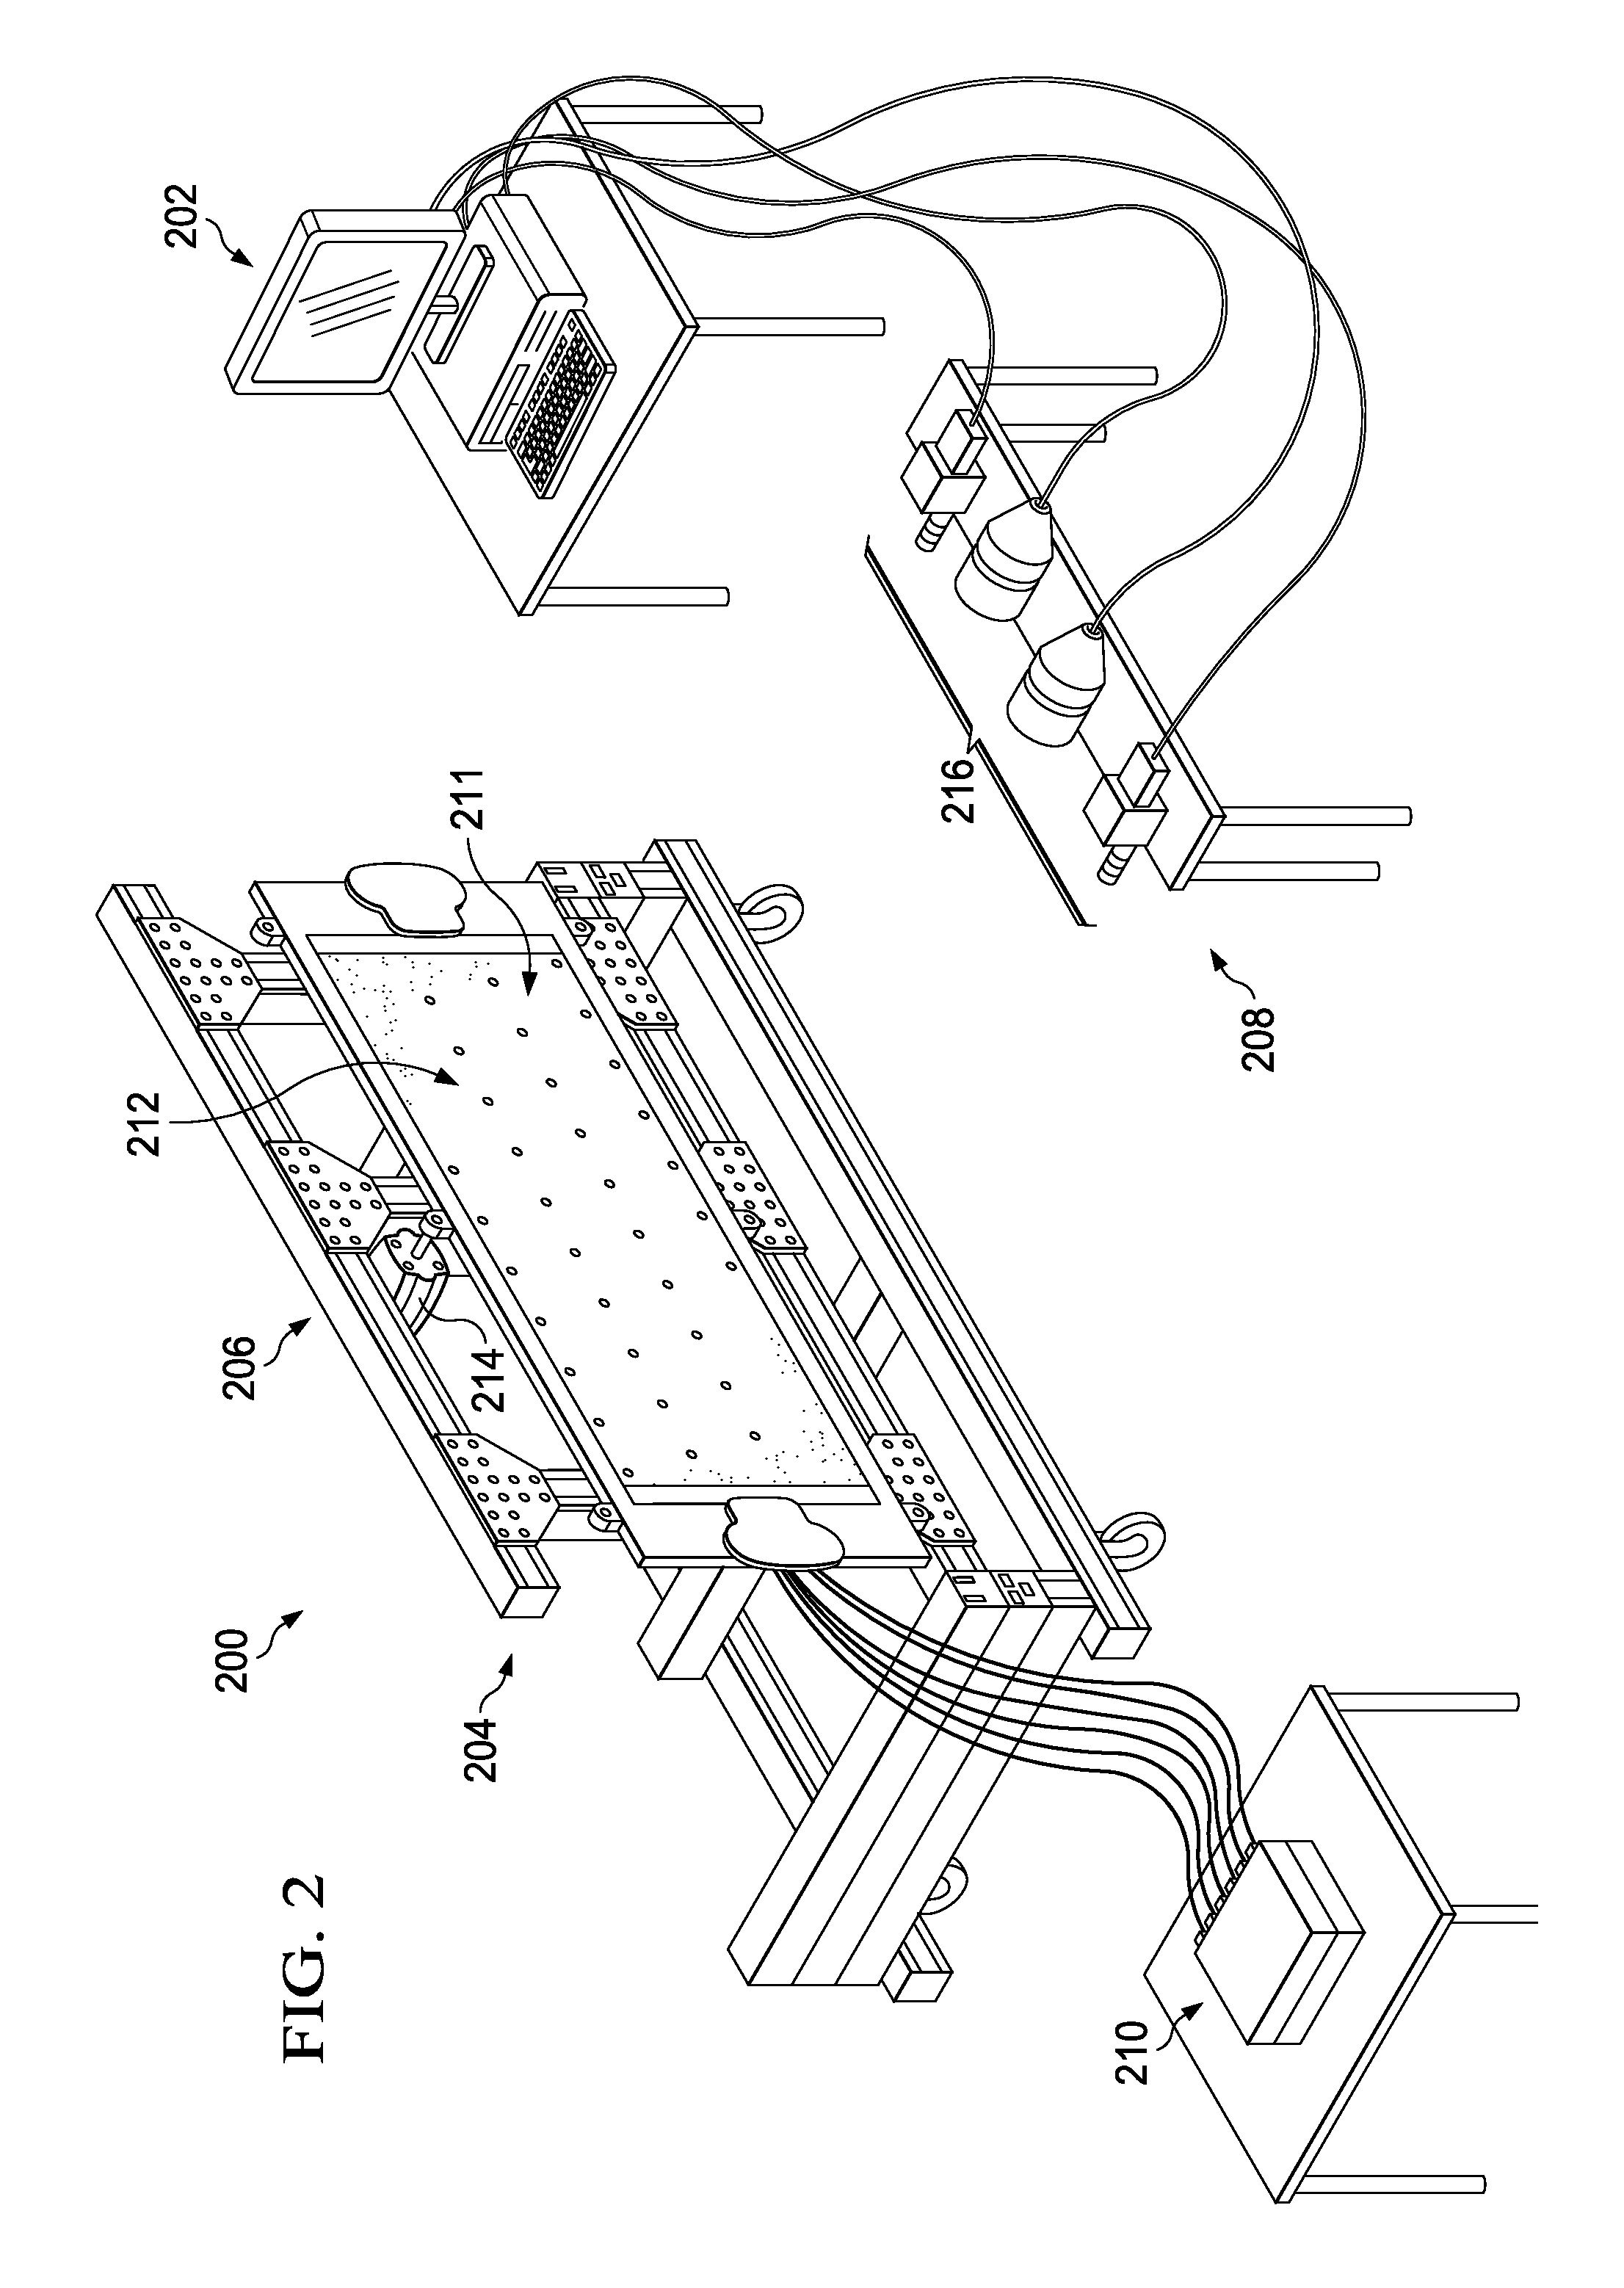 Method for identifying structural deformation